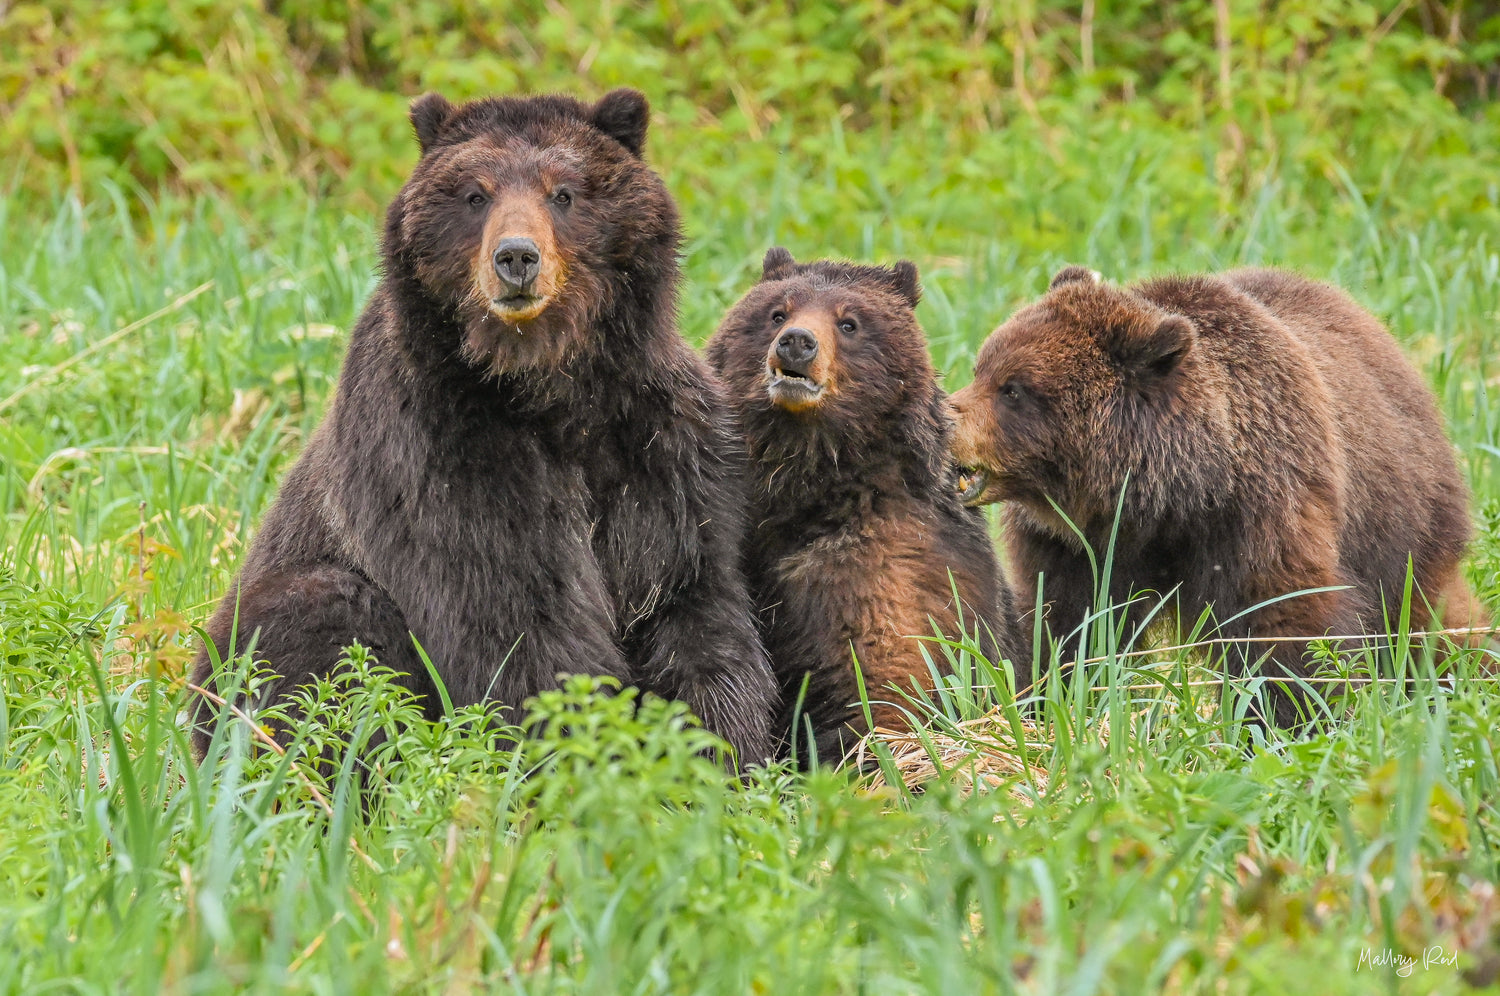 A picture of a brown bear mom with her two cubs.